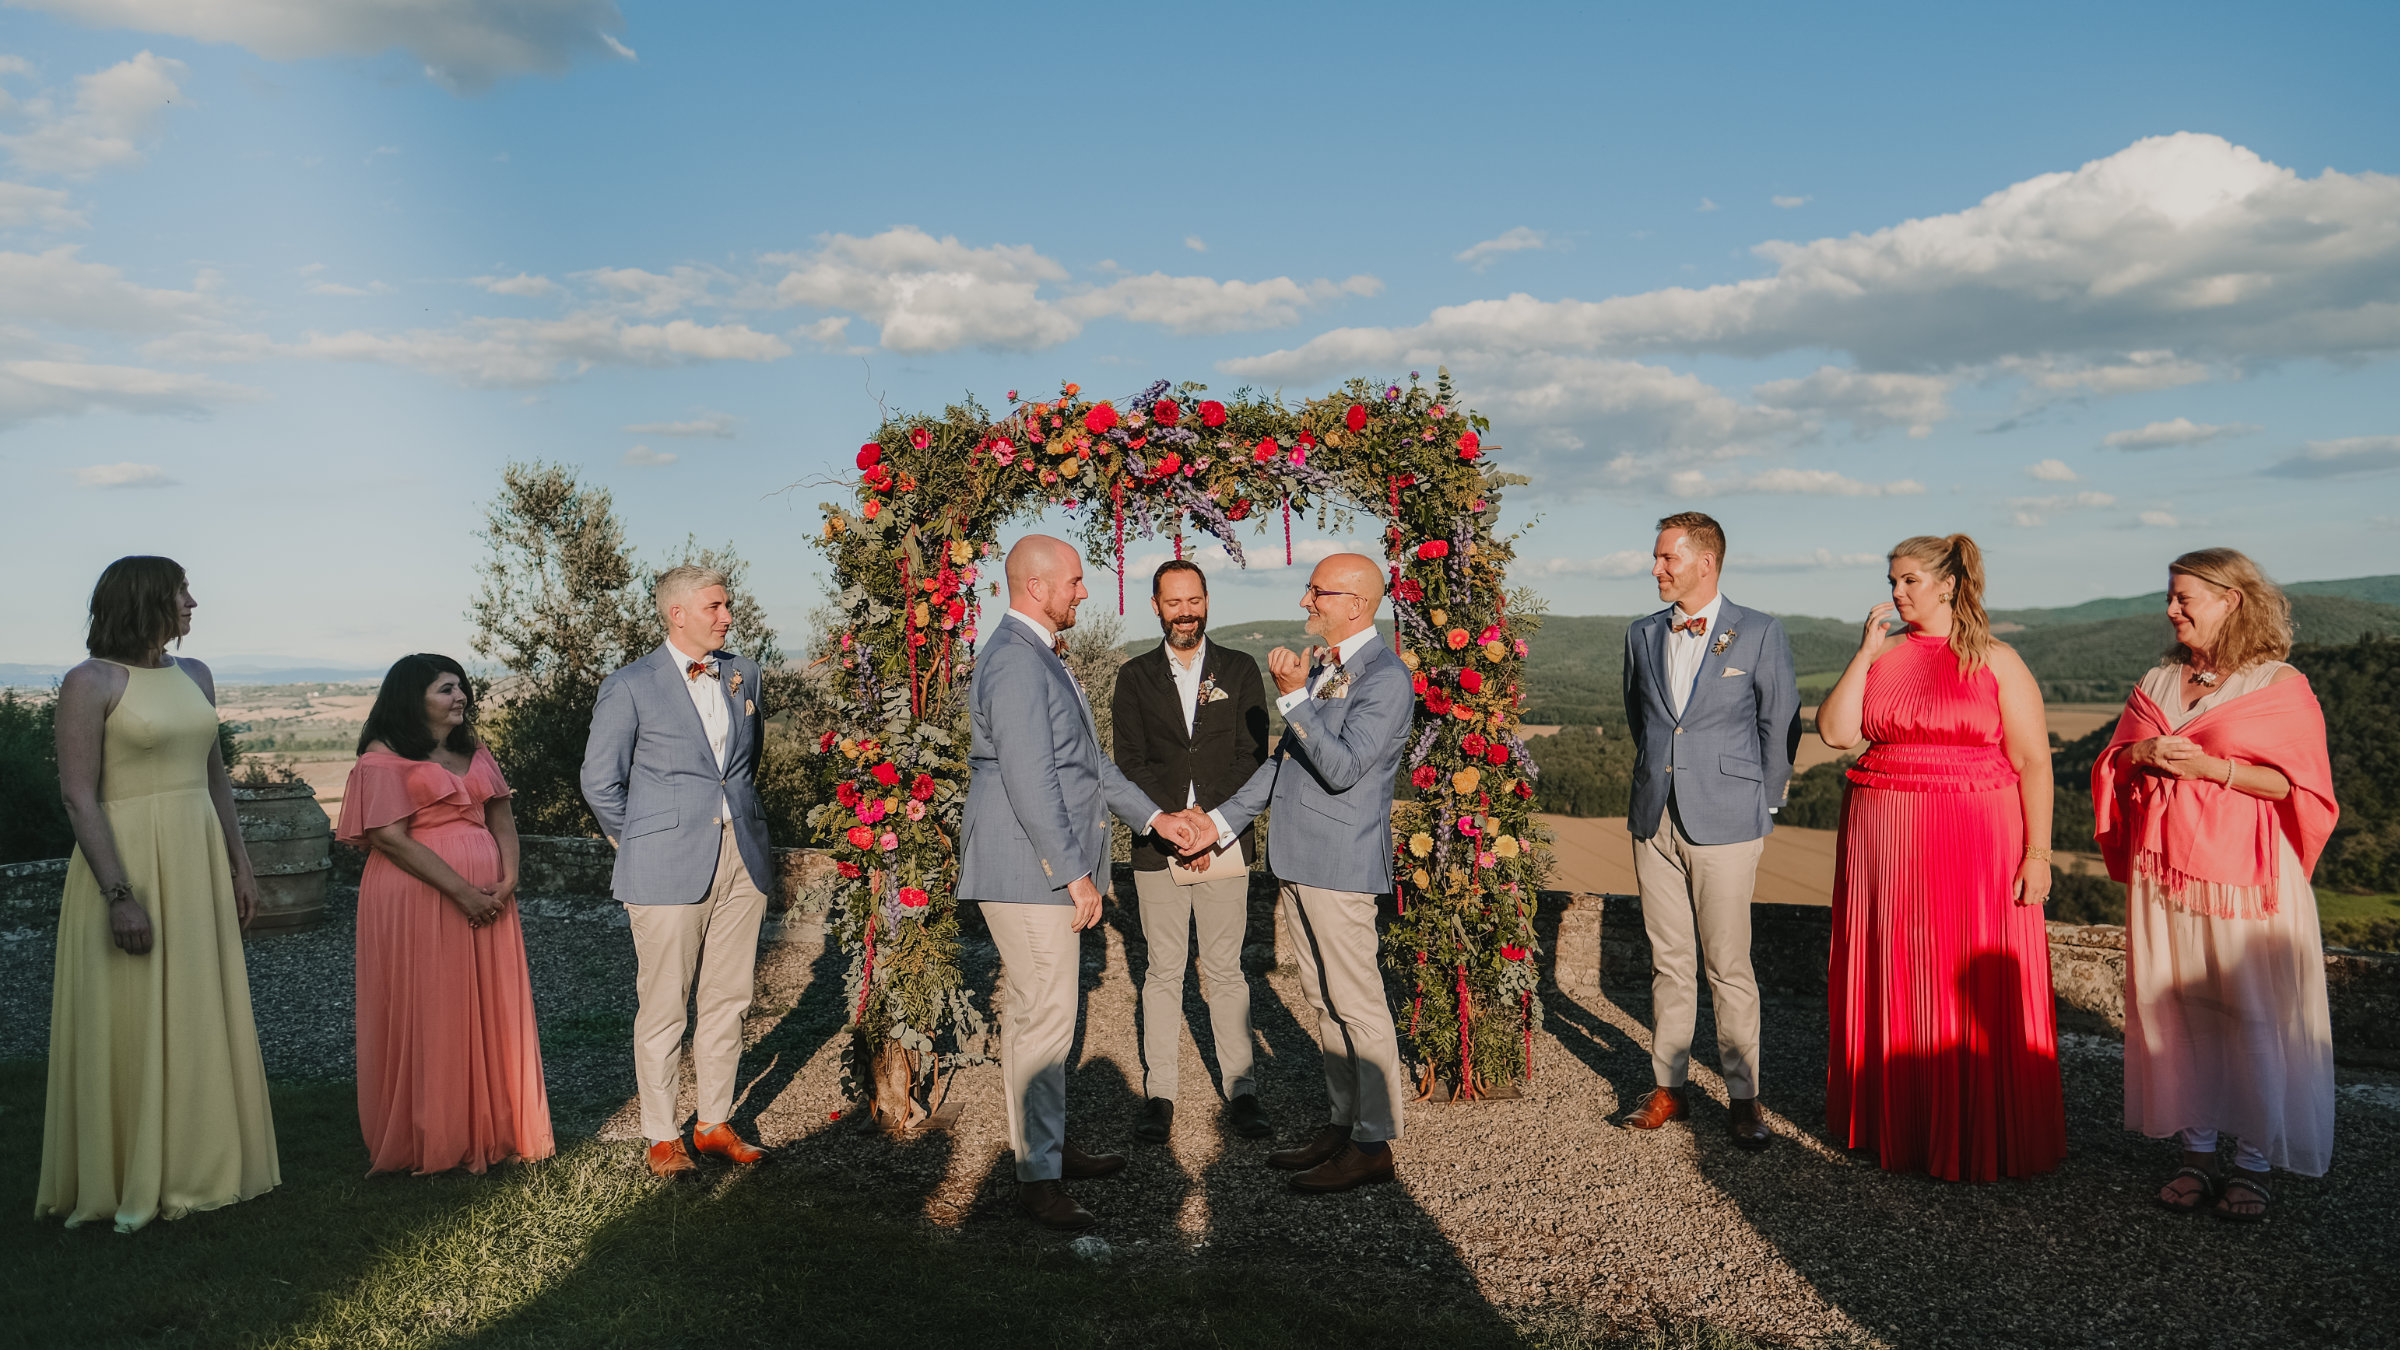 Gary and Mike tying the knot in Montestigliano - photo by LuisaStarling weddingphotographer-153